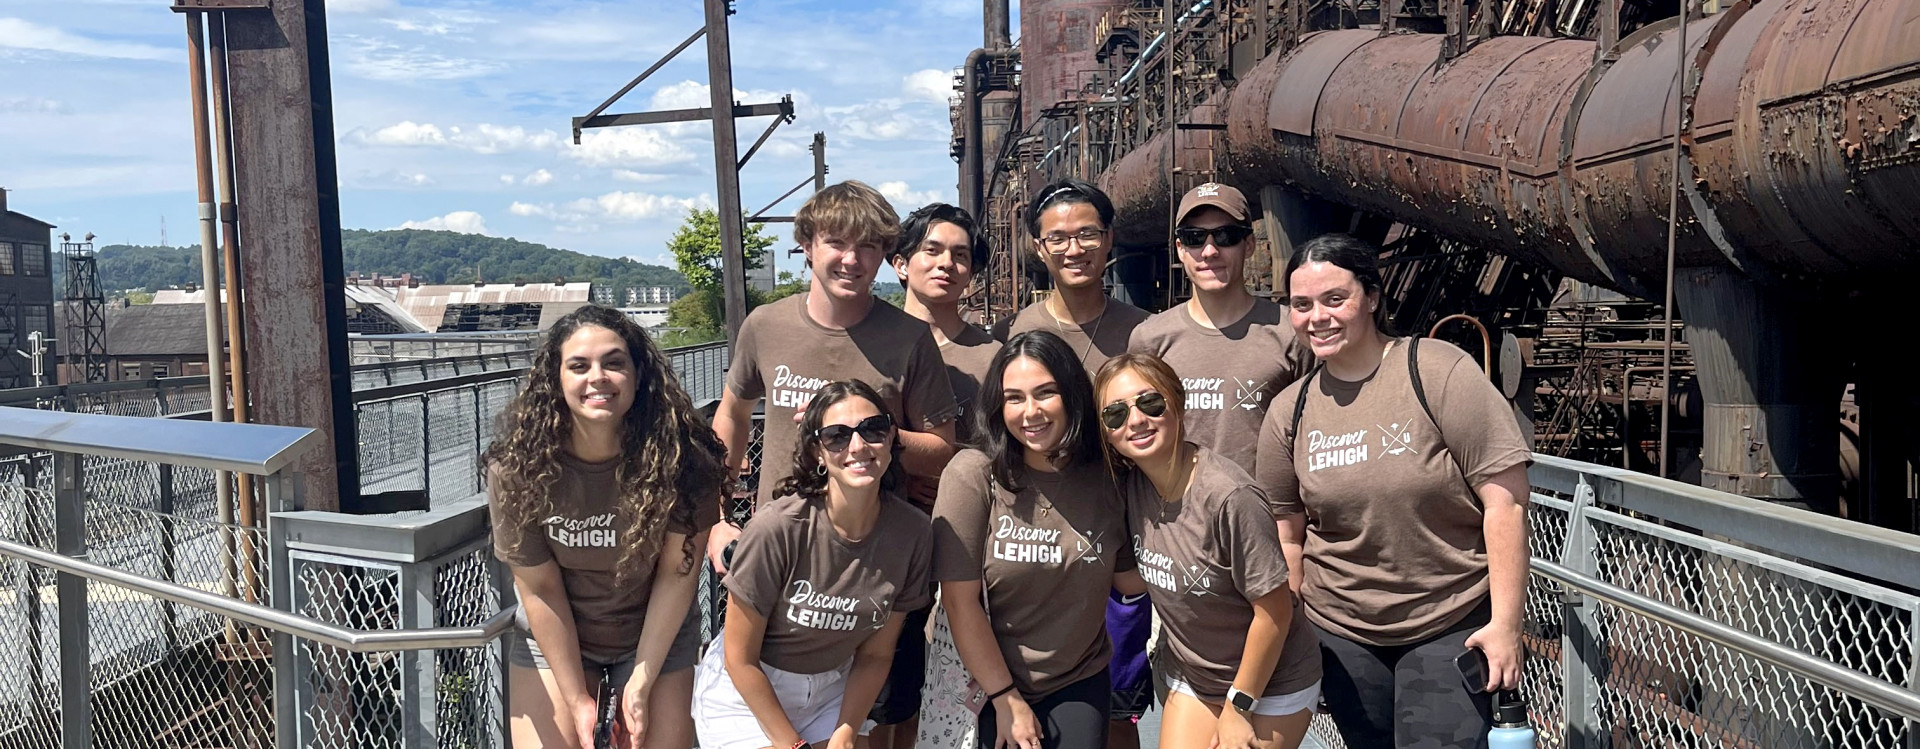 Discover Lehigh students at the Steel Stacks